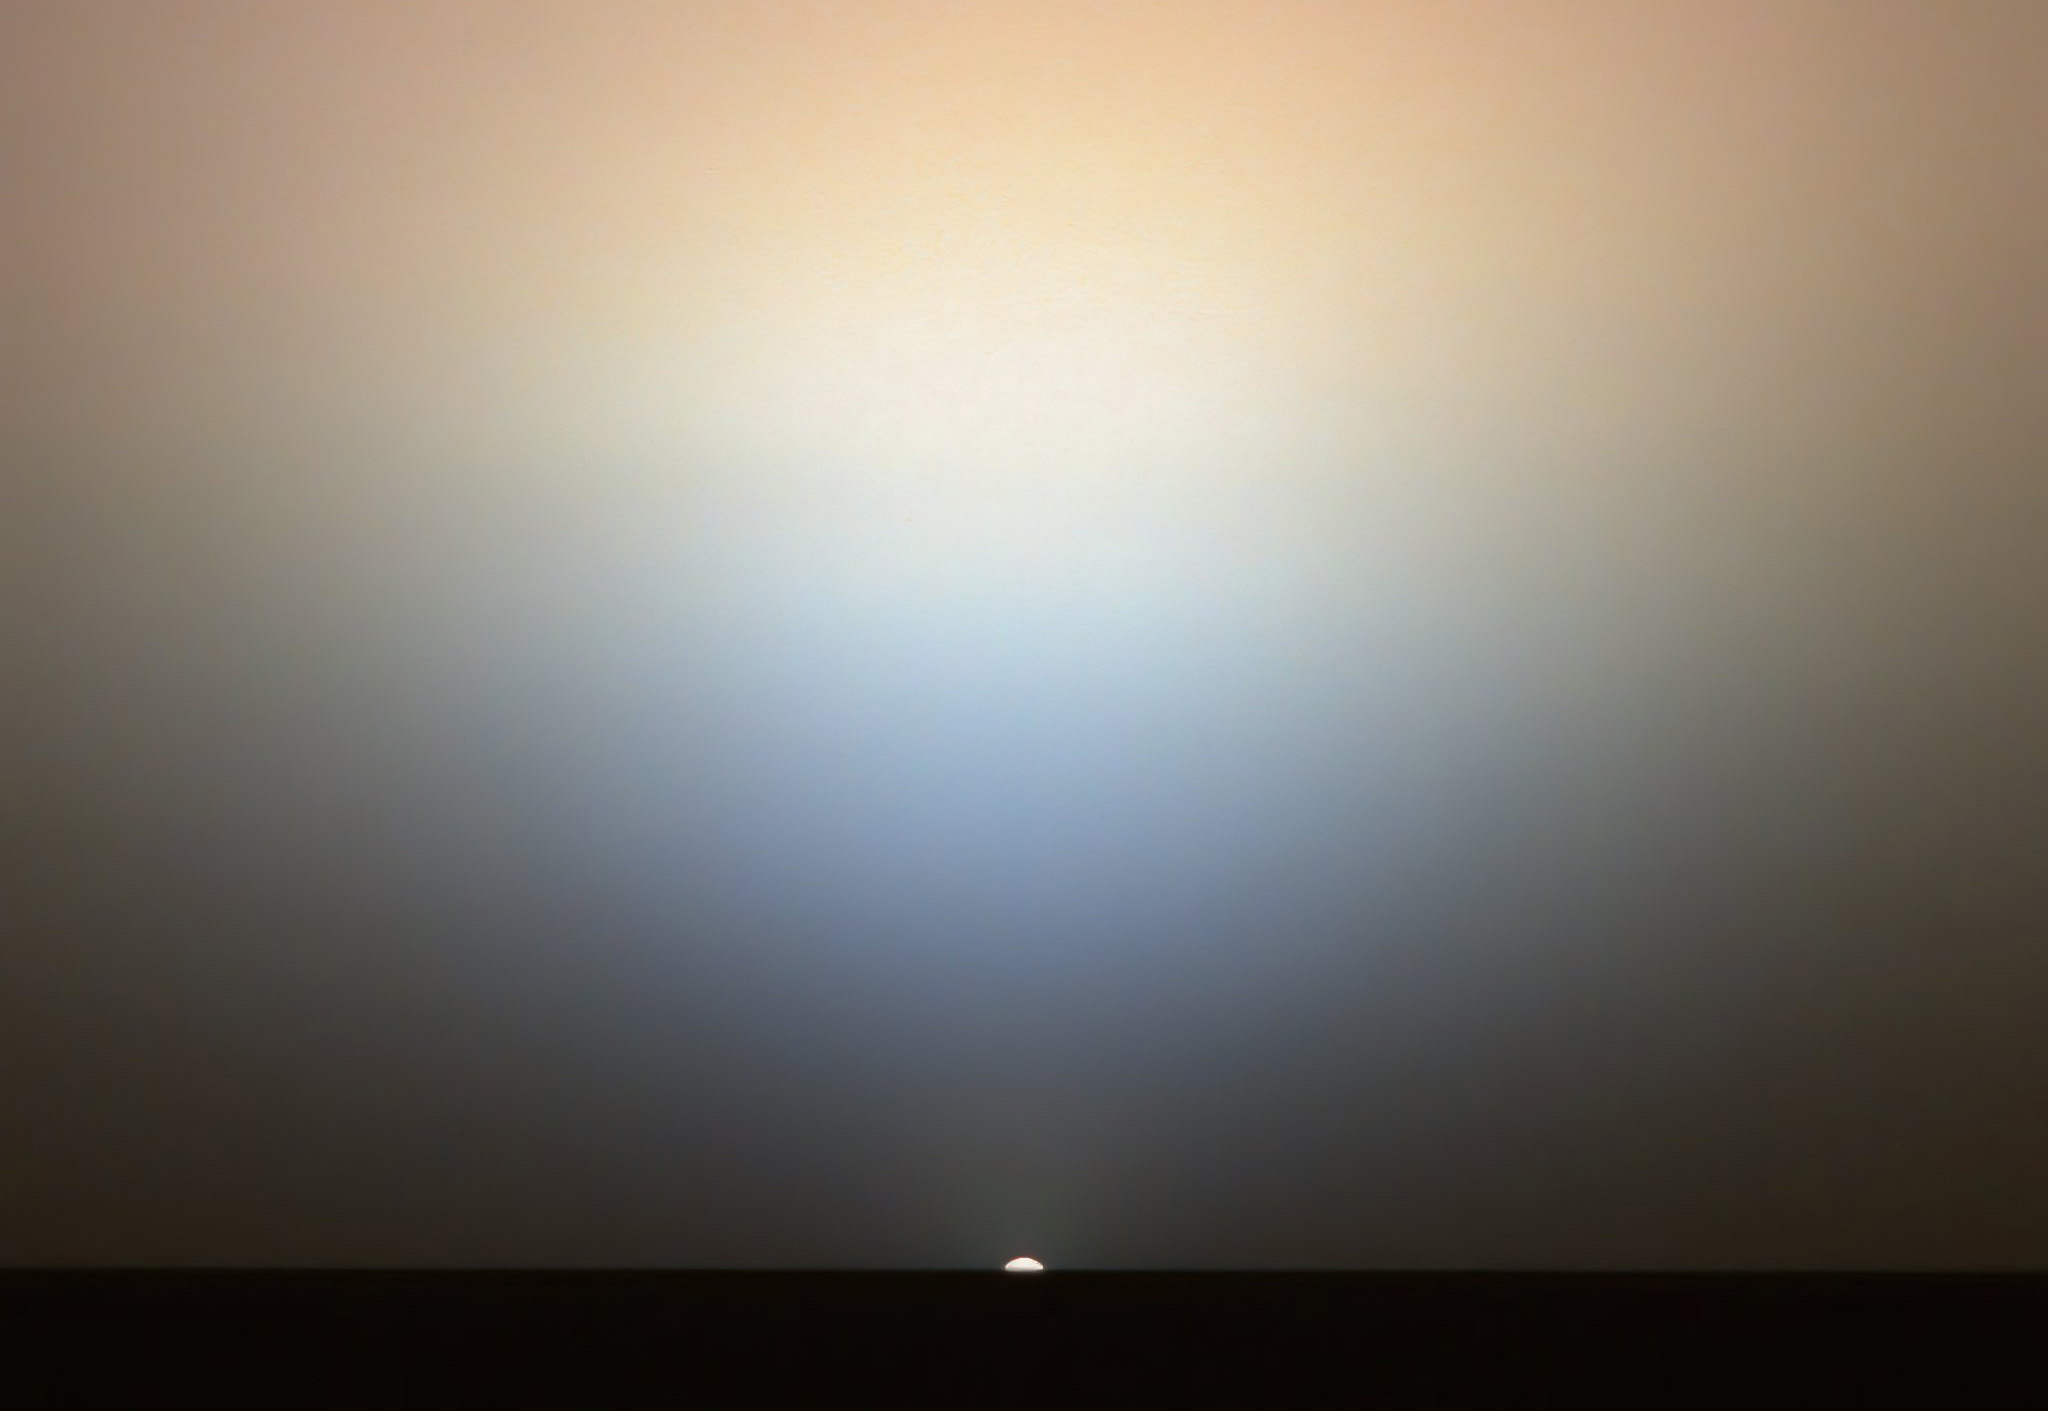 This is what sunrise looks like on a planet 225 million kilometers away from Earth